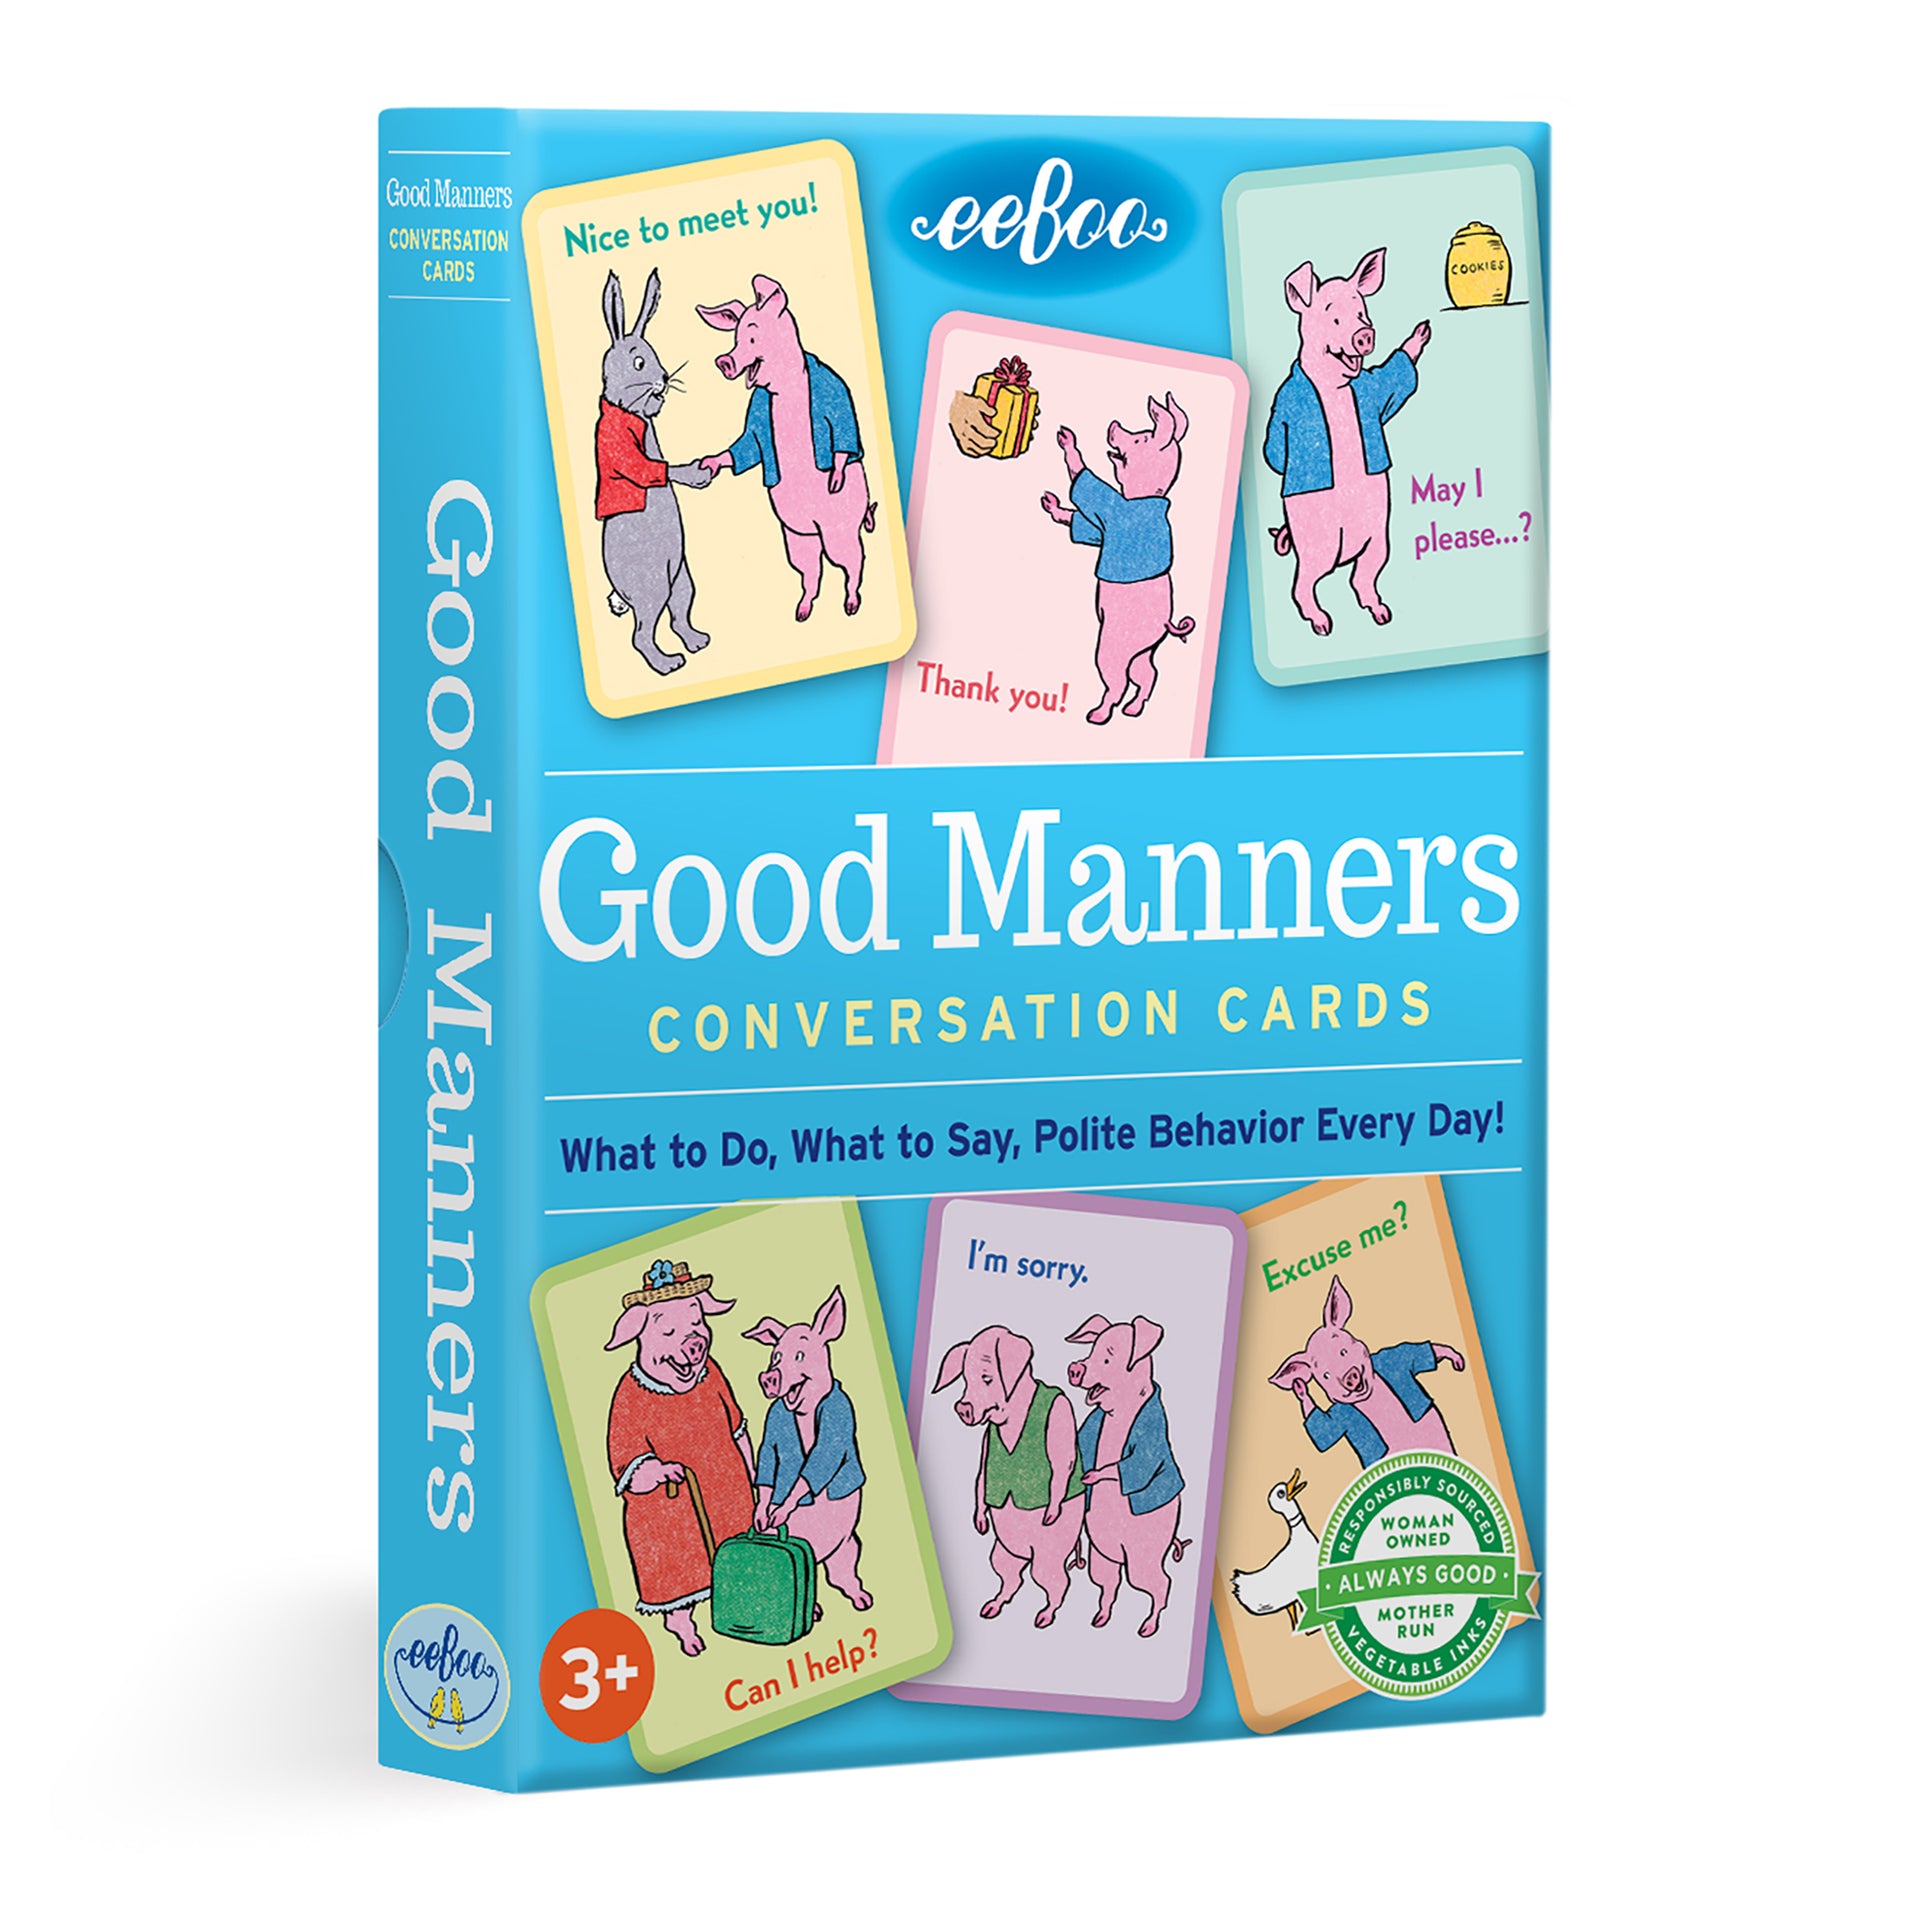 good manners images for kids